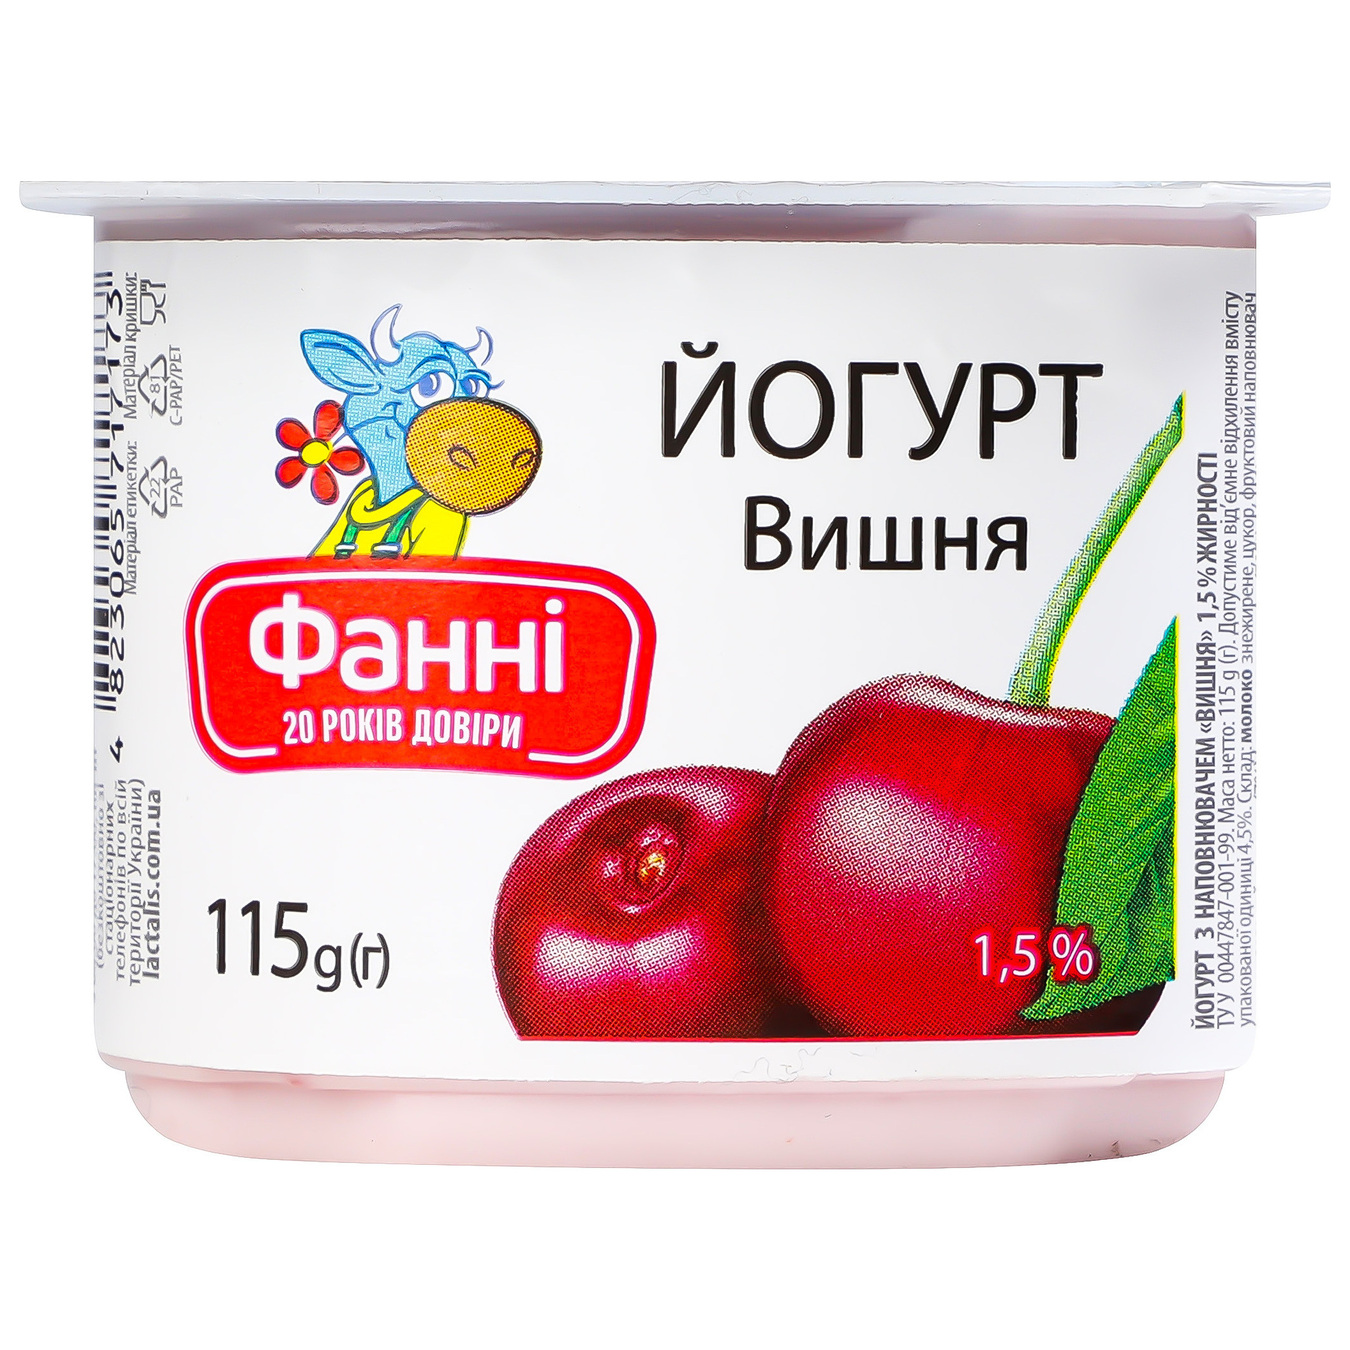 Fanny yogurt with cherry filling cup 1.5% 115g 5